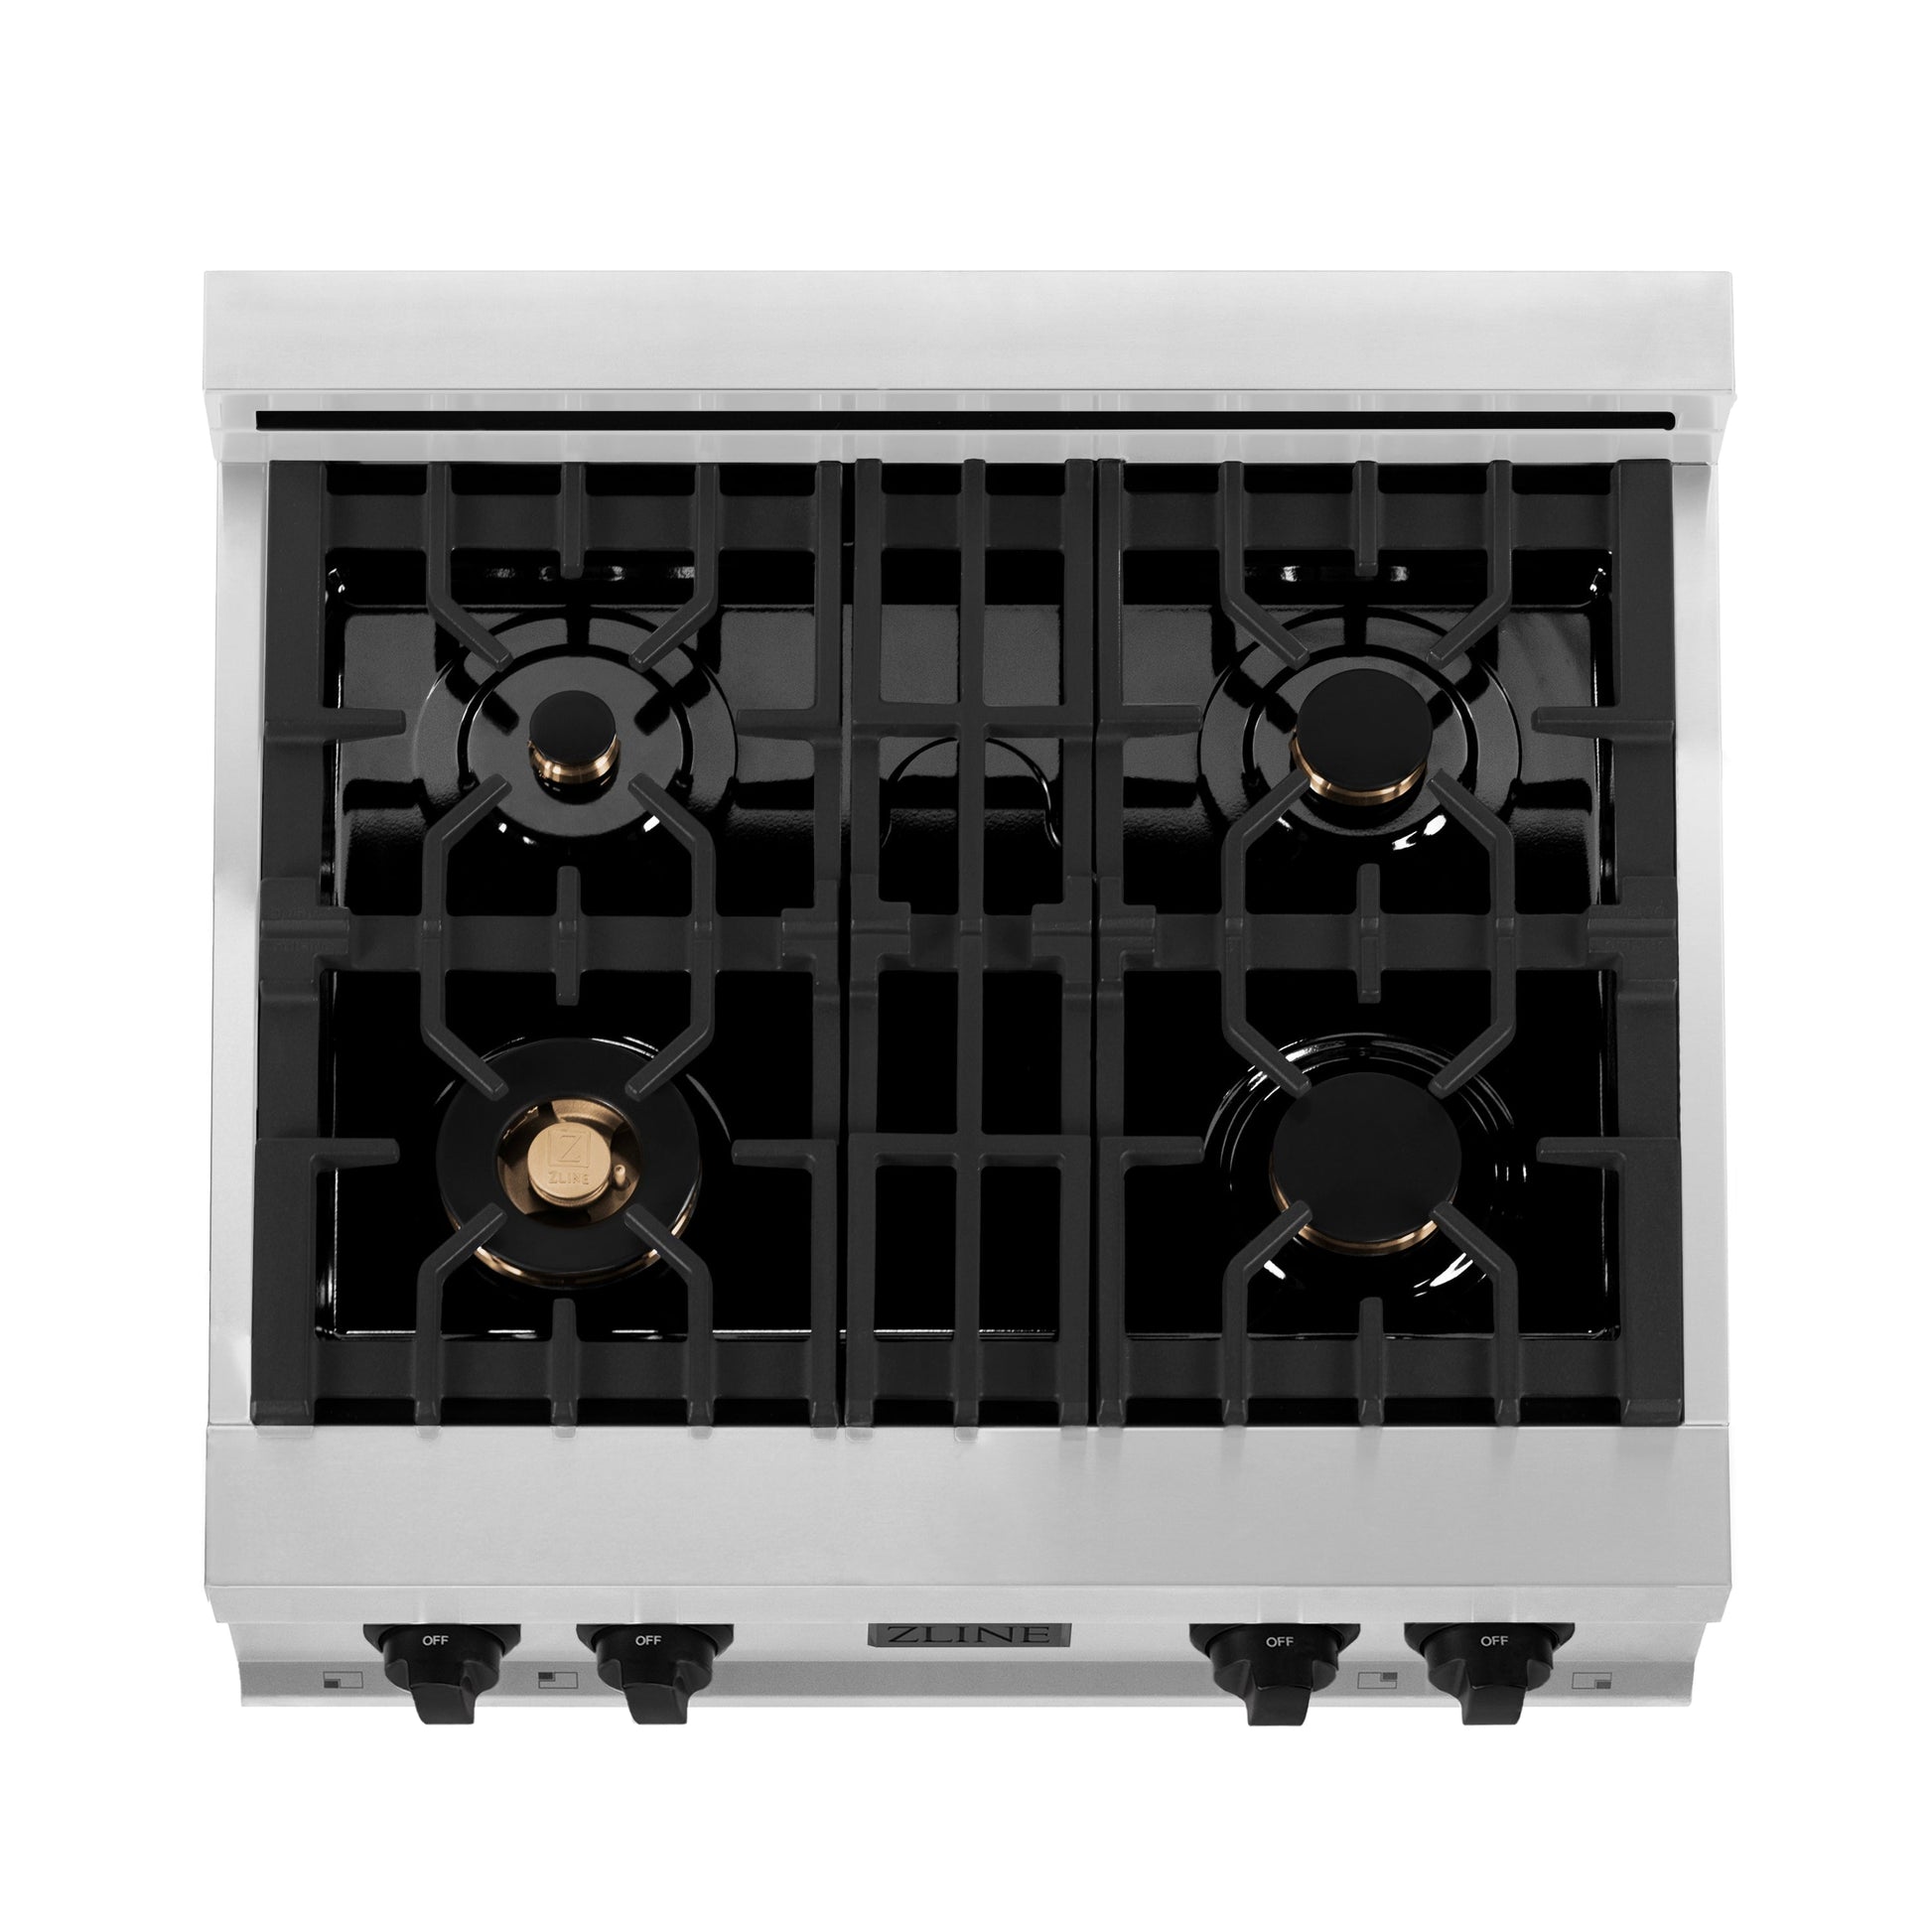 ZLINE Autograph Edition 30" Porcelain 4 Gas Burners Rangetop - Stainless Steel with Accents